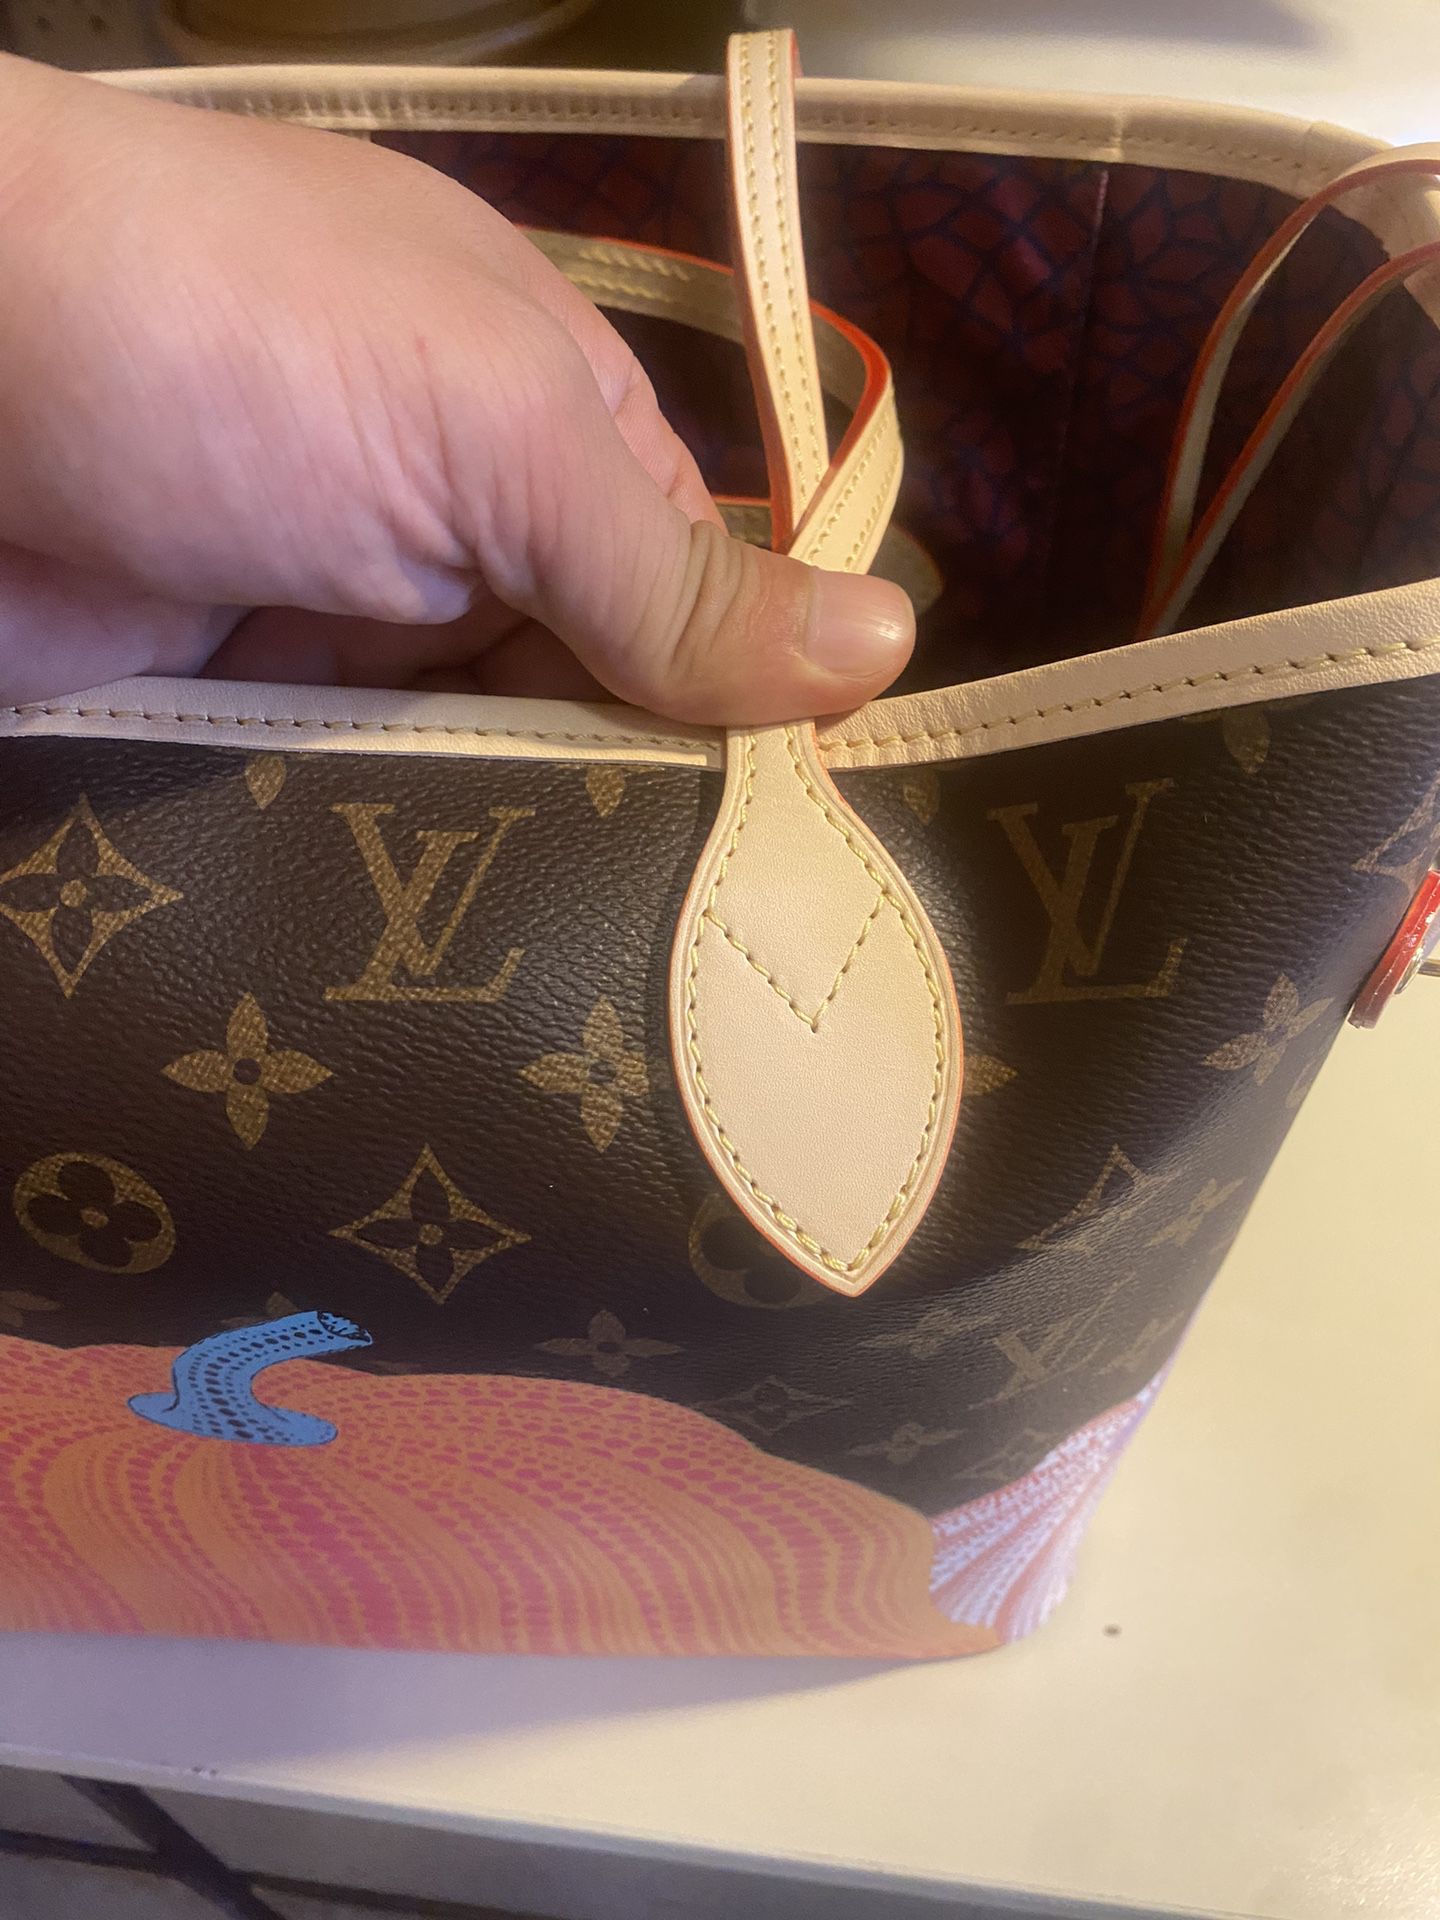 Louis Vuitton Marelle Bags 3 1 for Sale in Brooklyn, NY - OfferUp